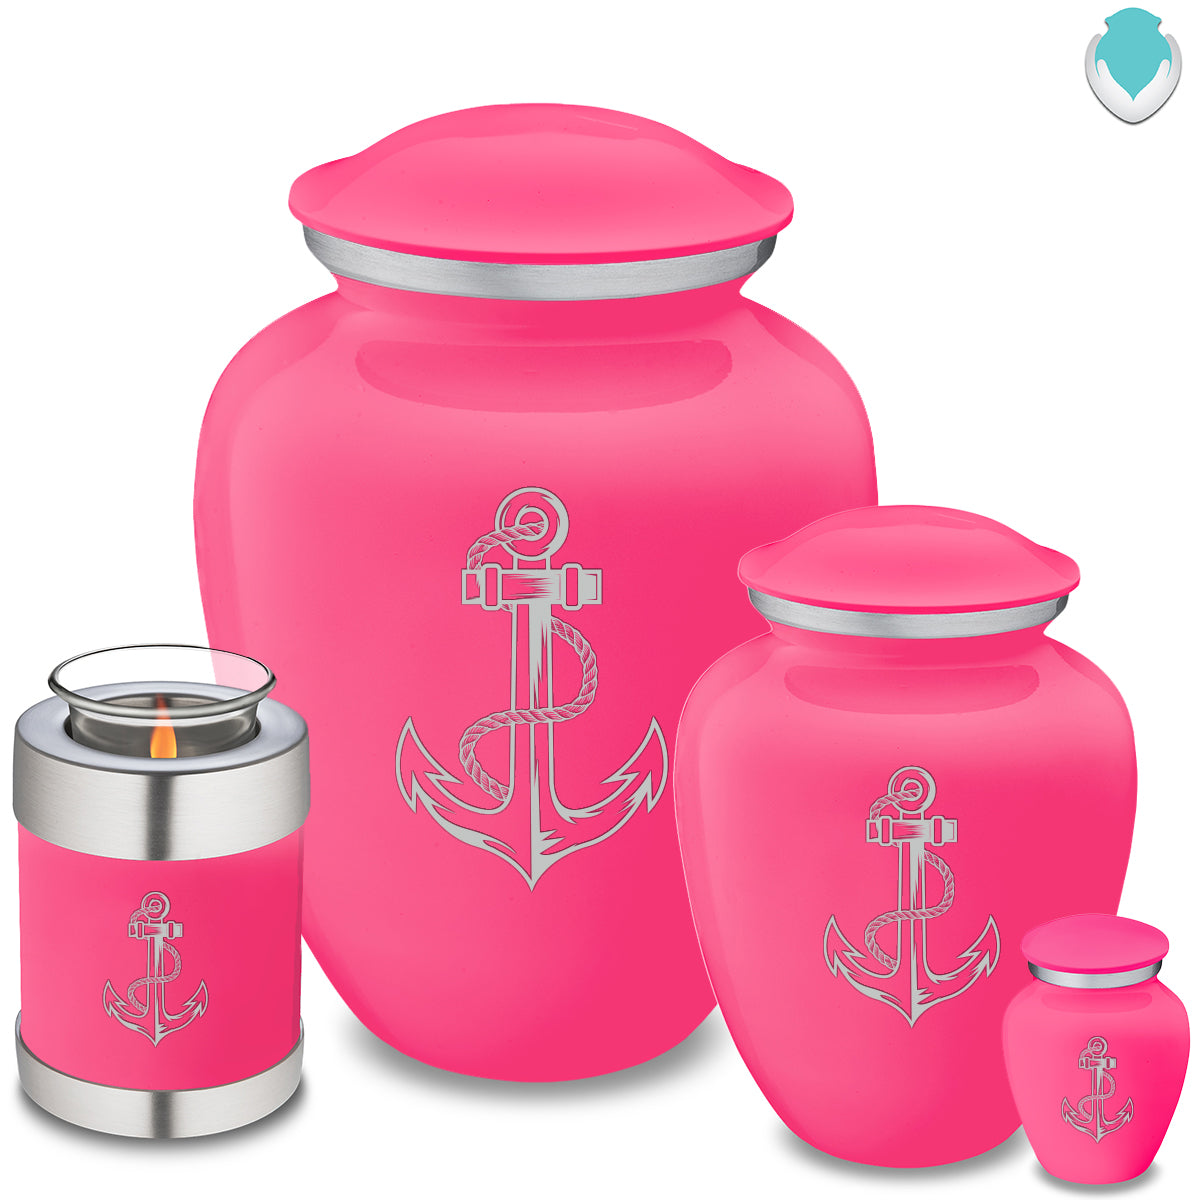 Adult Embrace Bright Pink Anchor Cremation Urn